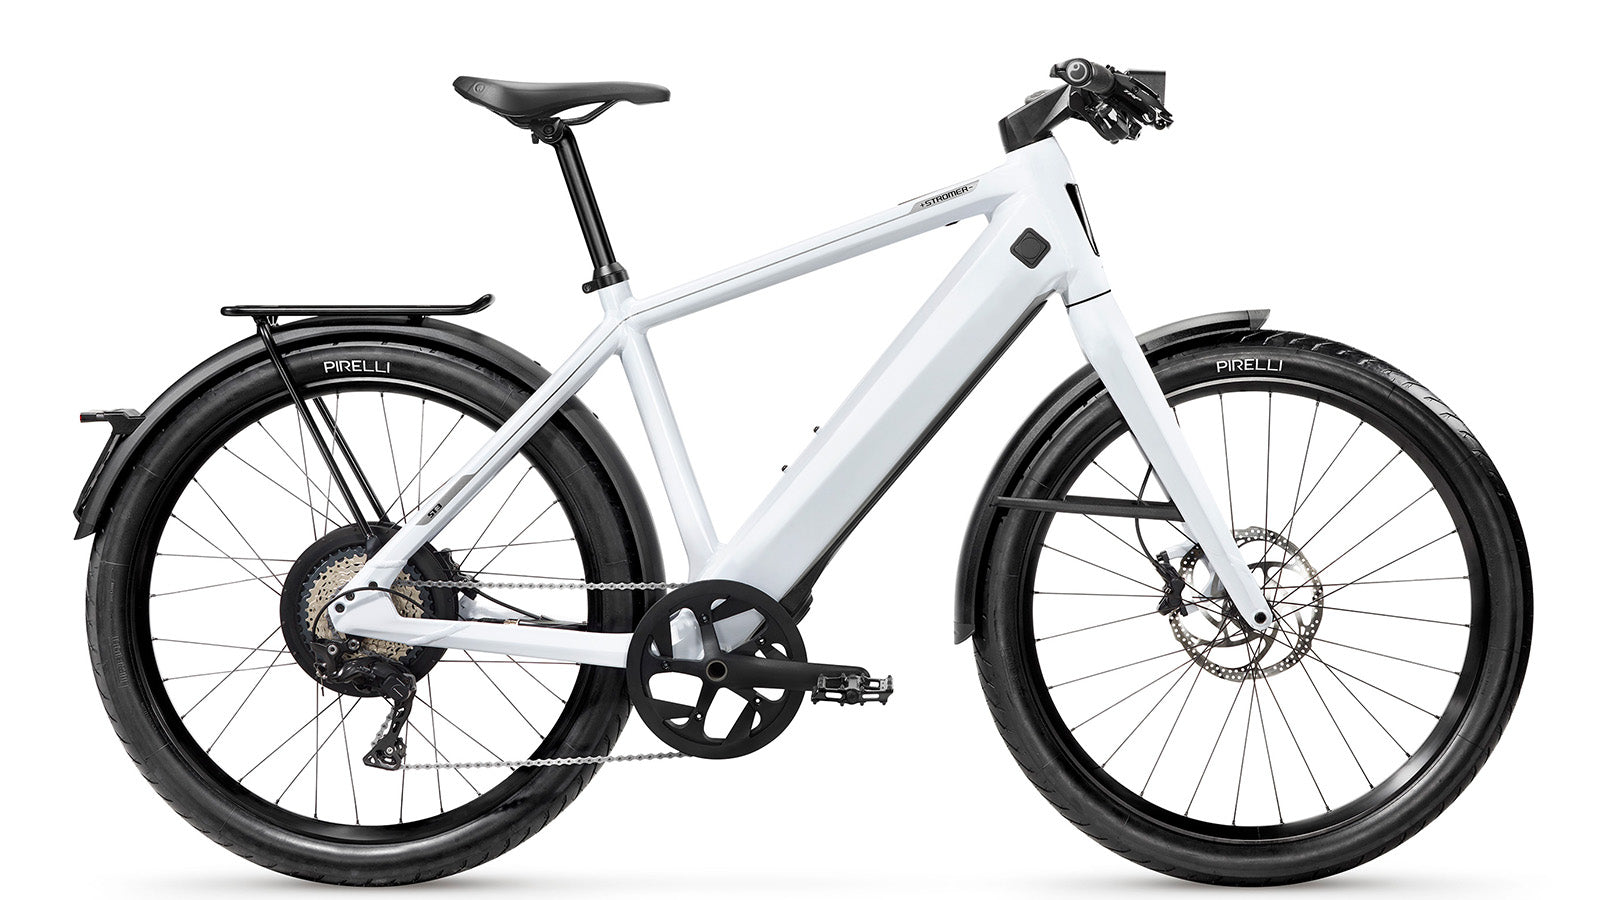 White modern electric bicycle Stromer - ST3 Sport with a sleek frame, equipped with Pirelli tires, disc brakes, a Gates carbon belt, and a rear carrier, isolated on a white background.